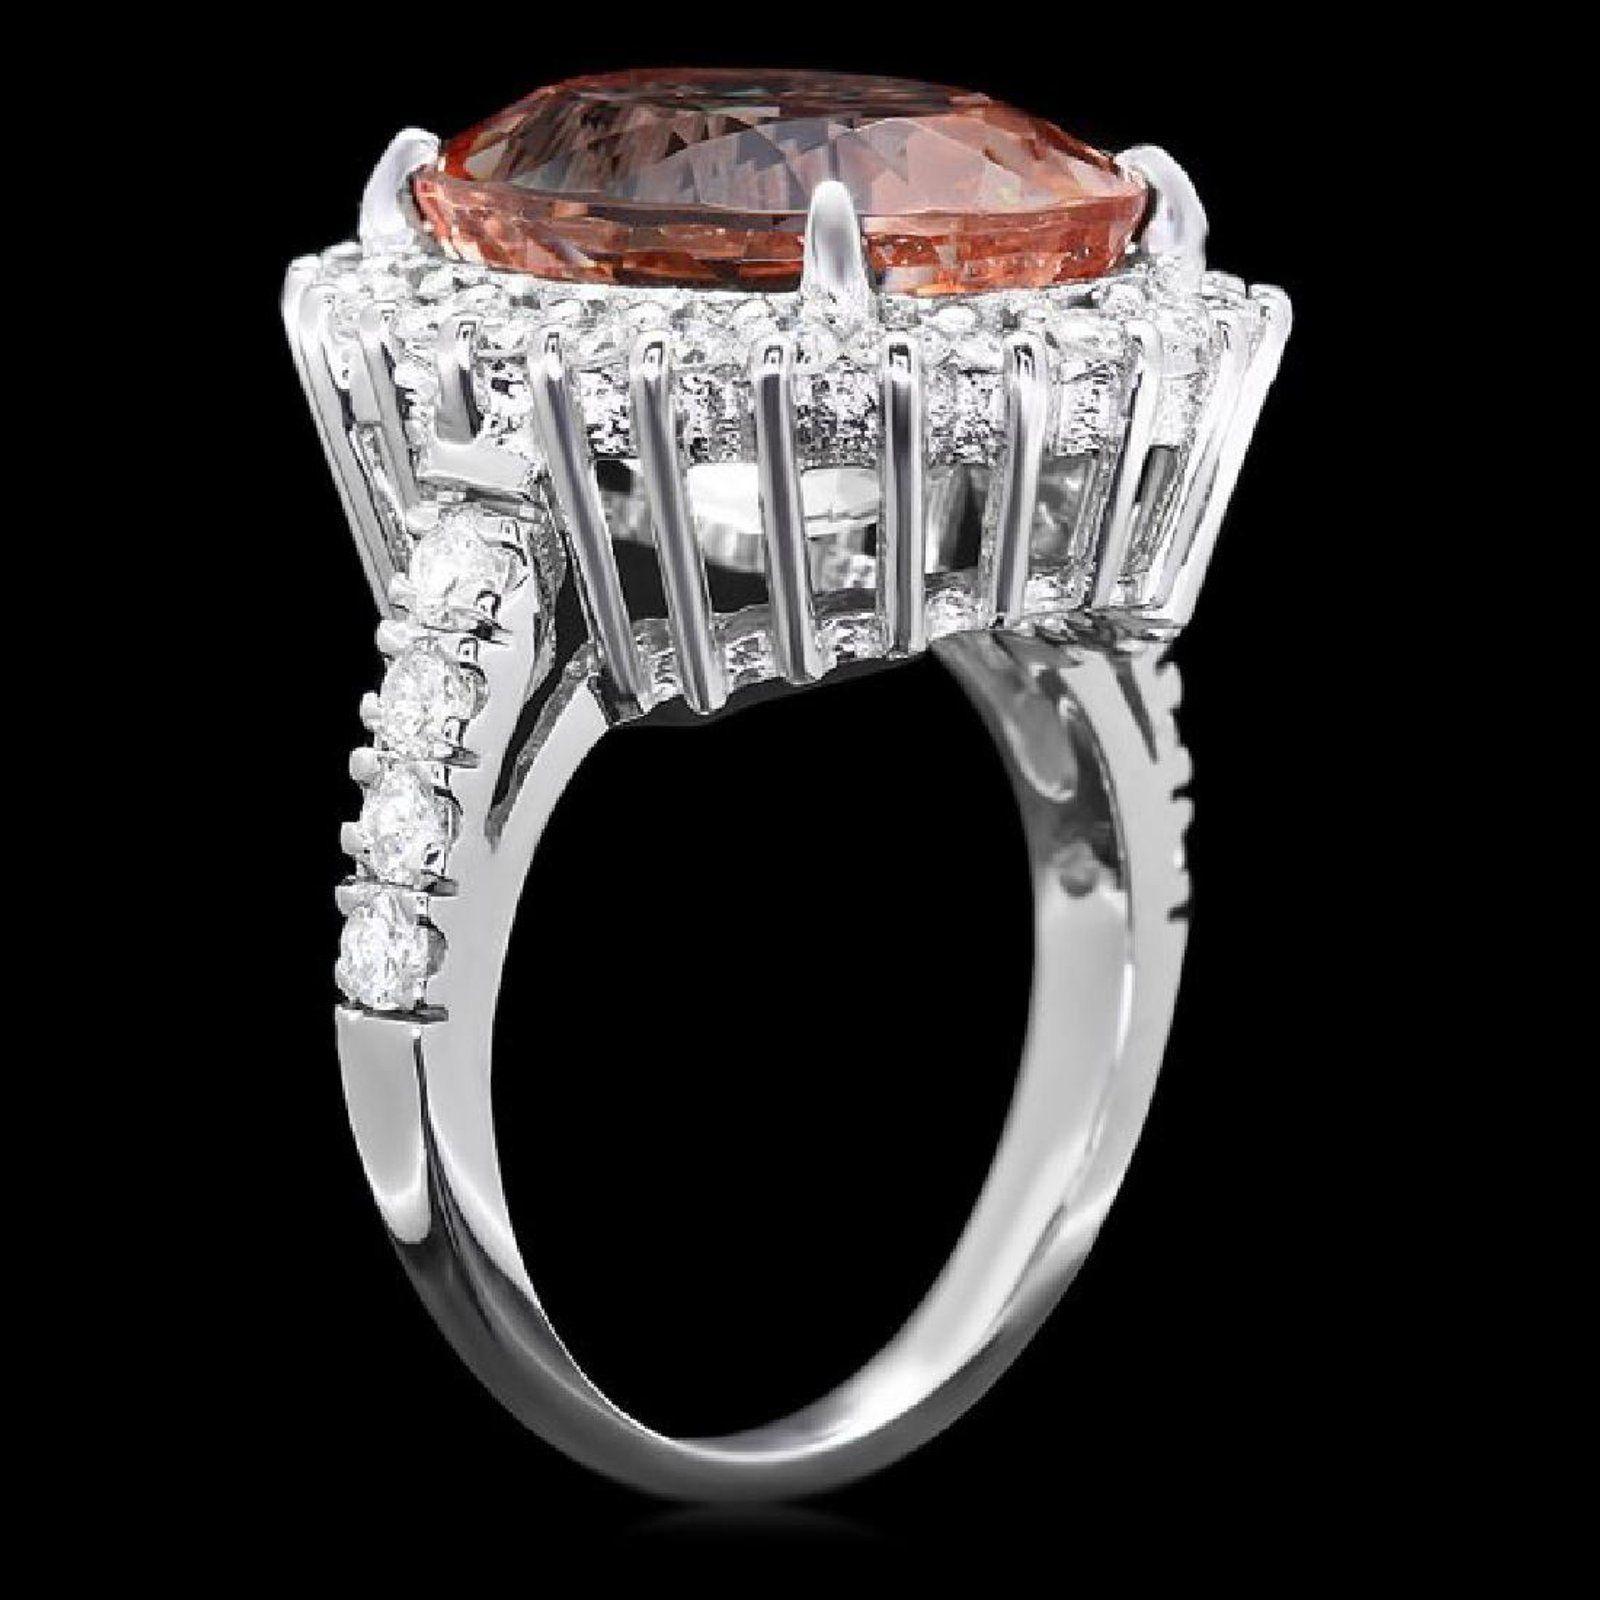 9.20 Carats Impressive Natural Morganite and Diamond 14K Solid White Gold Ring

Suggested Replacement Value: Approx. $8,000.00

Total Morganite Weight is: Approx. 8.00 Carats

Morganite Treatment: Heating

Morganite Measures: Approx. 13.00 x